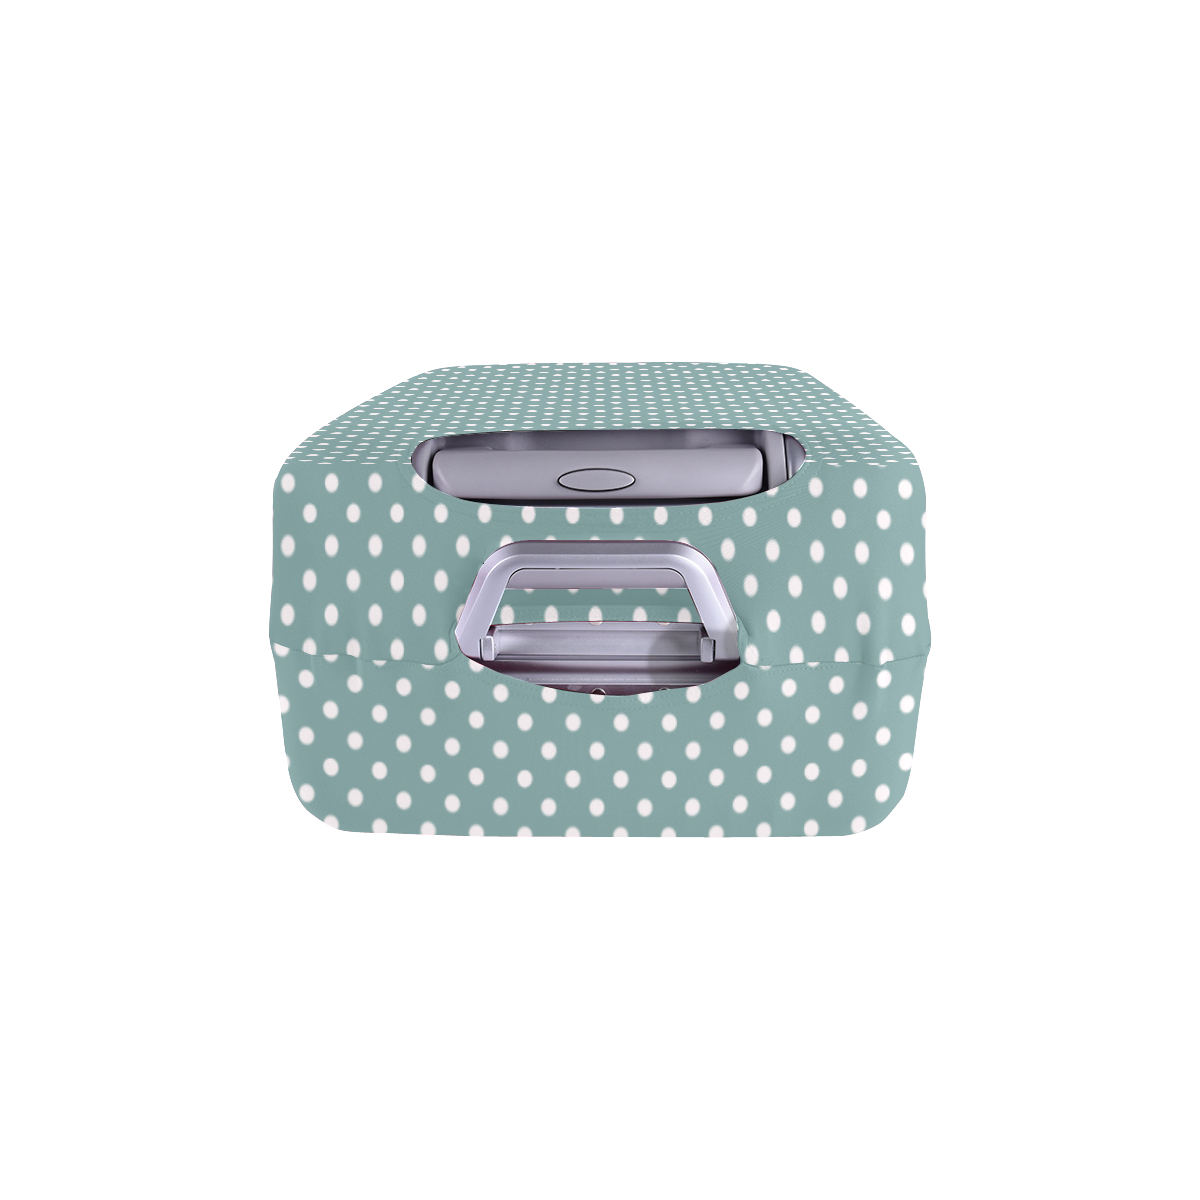 Silver blue polka dots Luggage Cover/Large 26"-28"